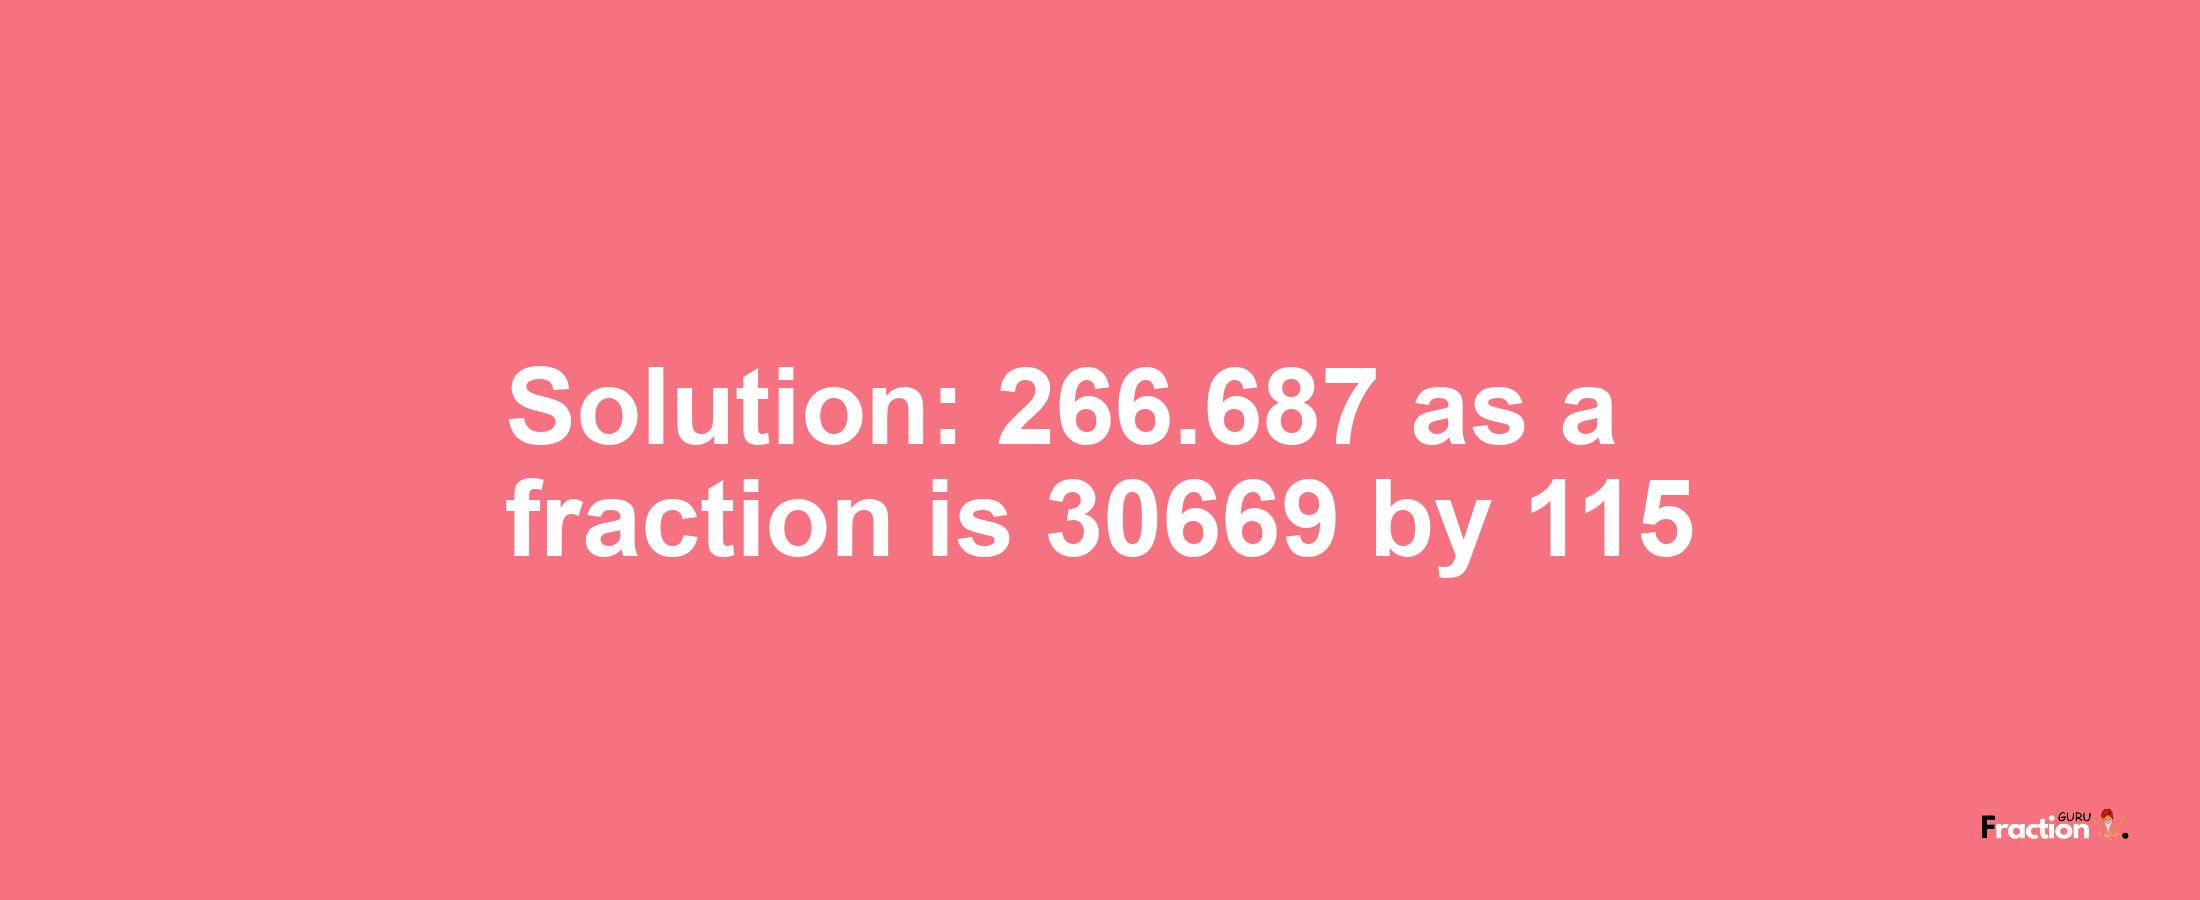 Solution:266.687 as a fraction is 30669/115